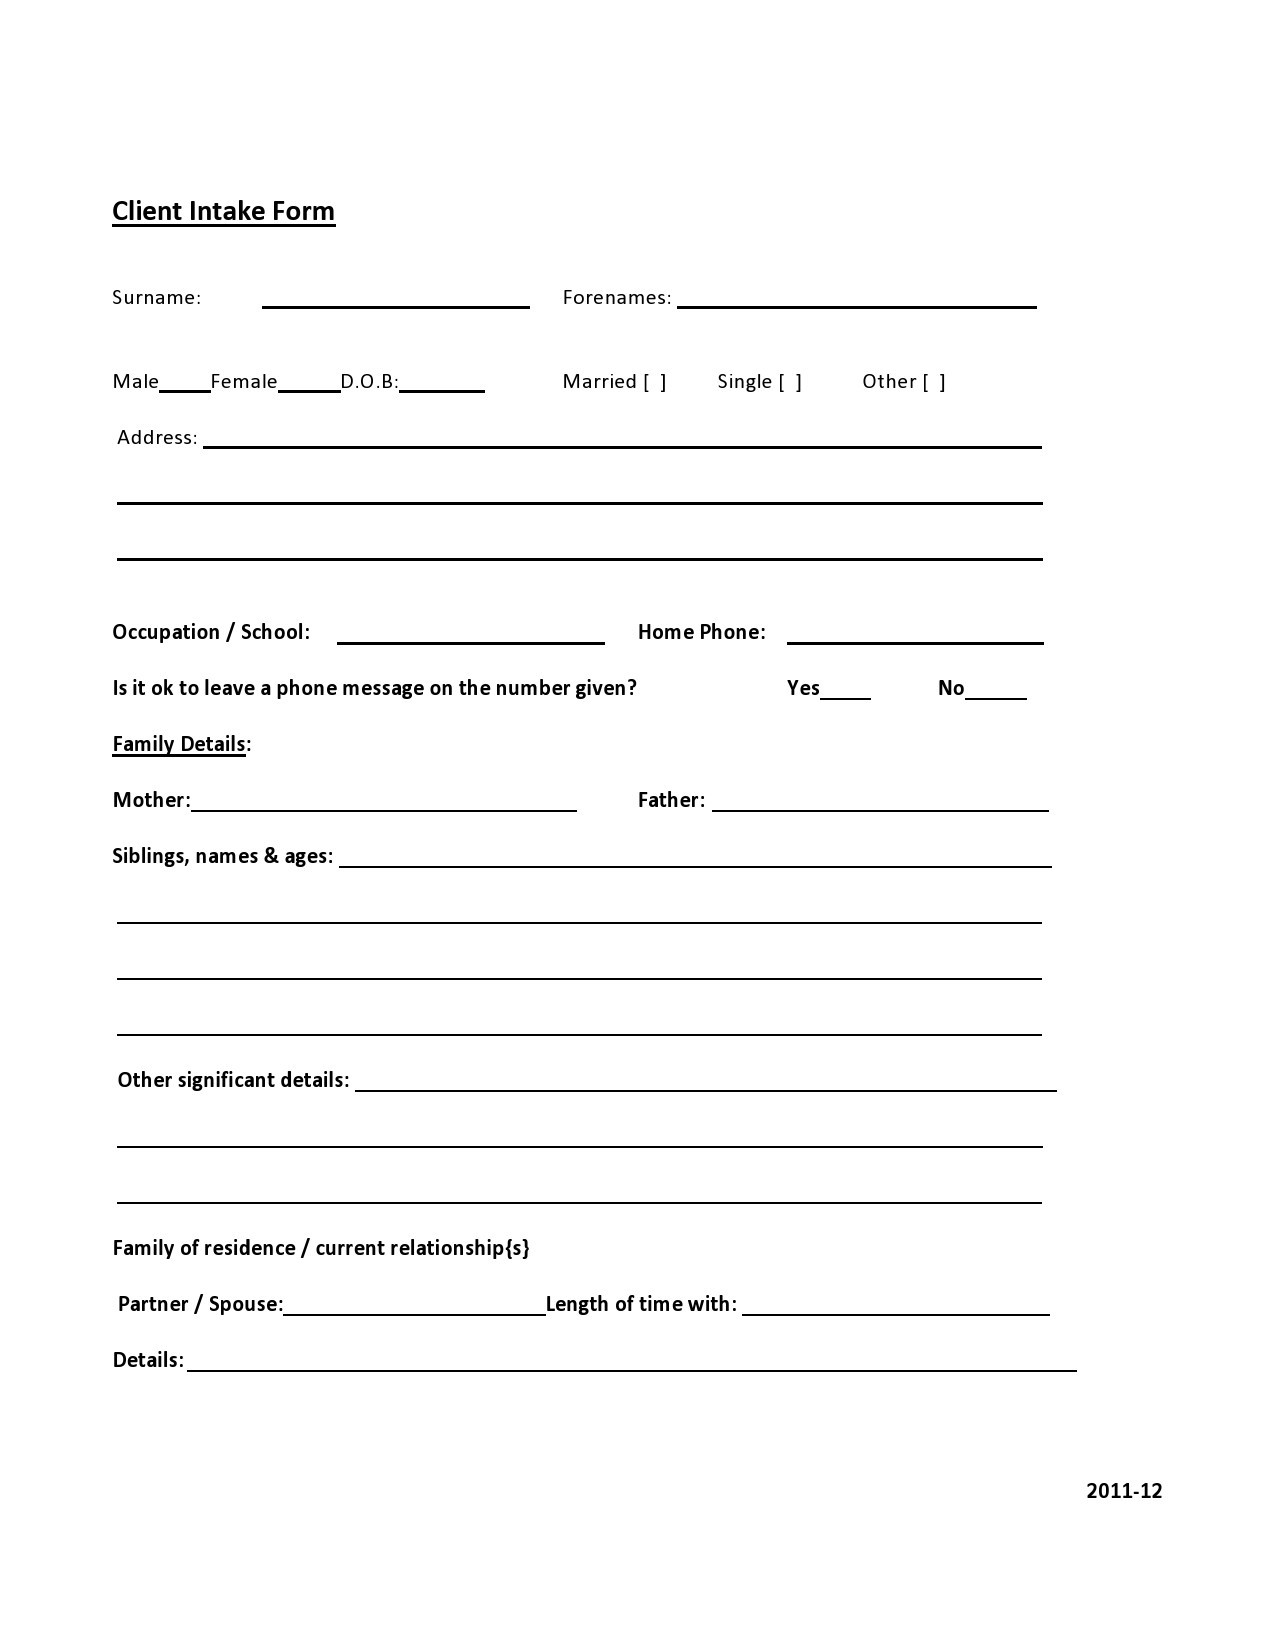 Free client intake form 35